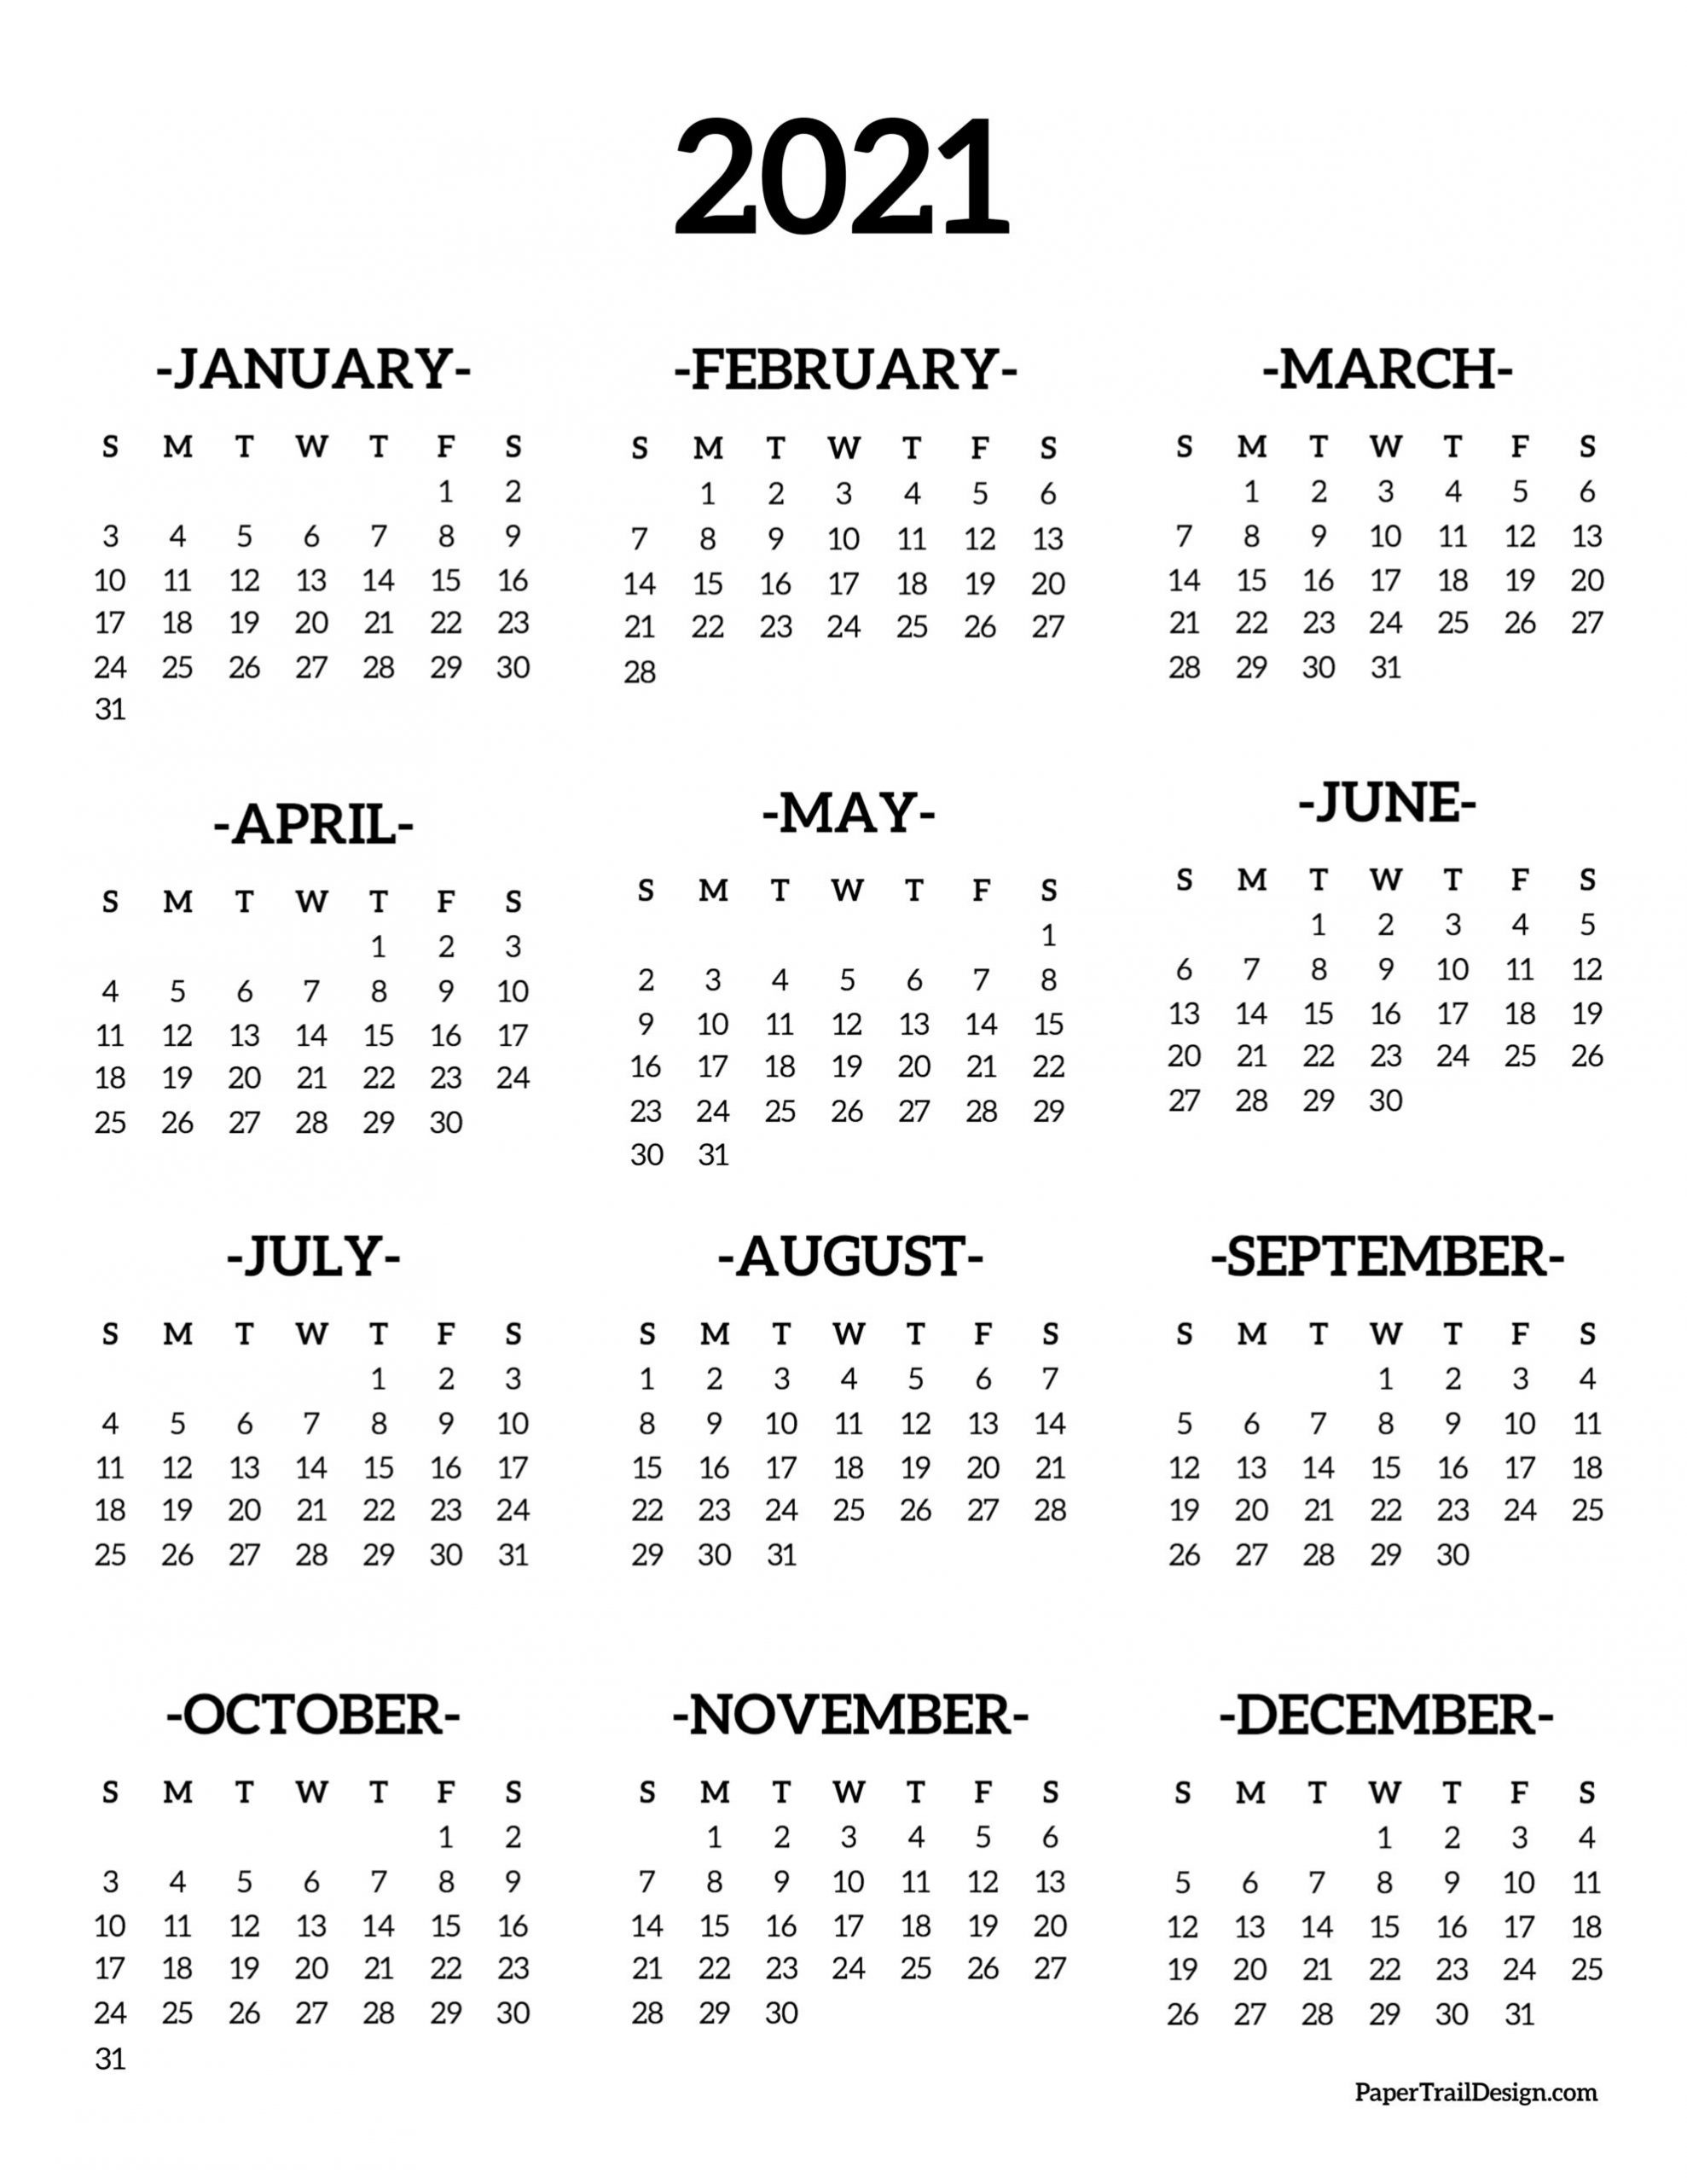 Calendar 2021 Printable One Page | Paper Trail Design-Free Yearly Calendar 2021